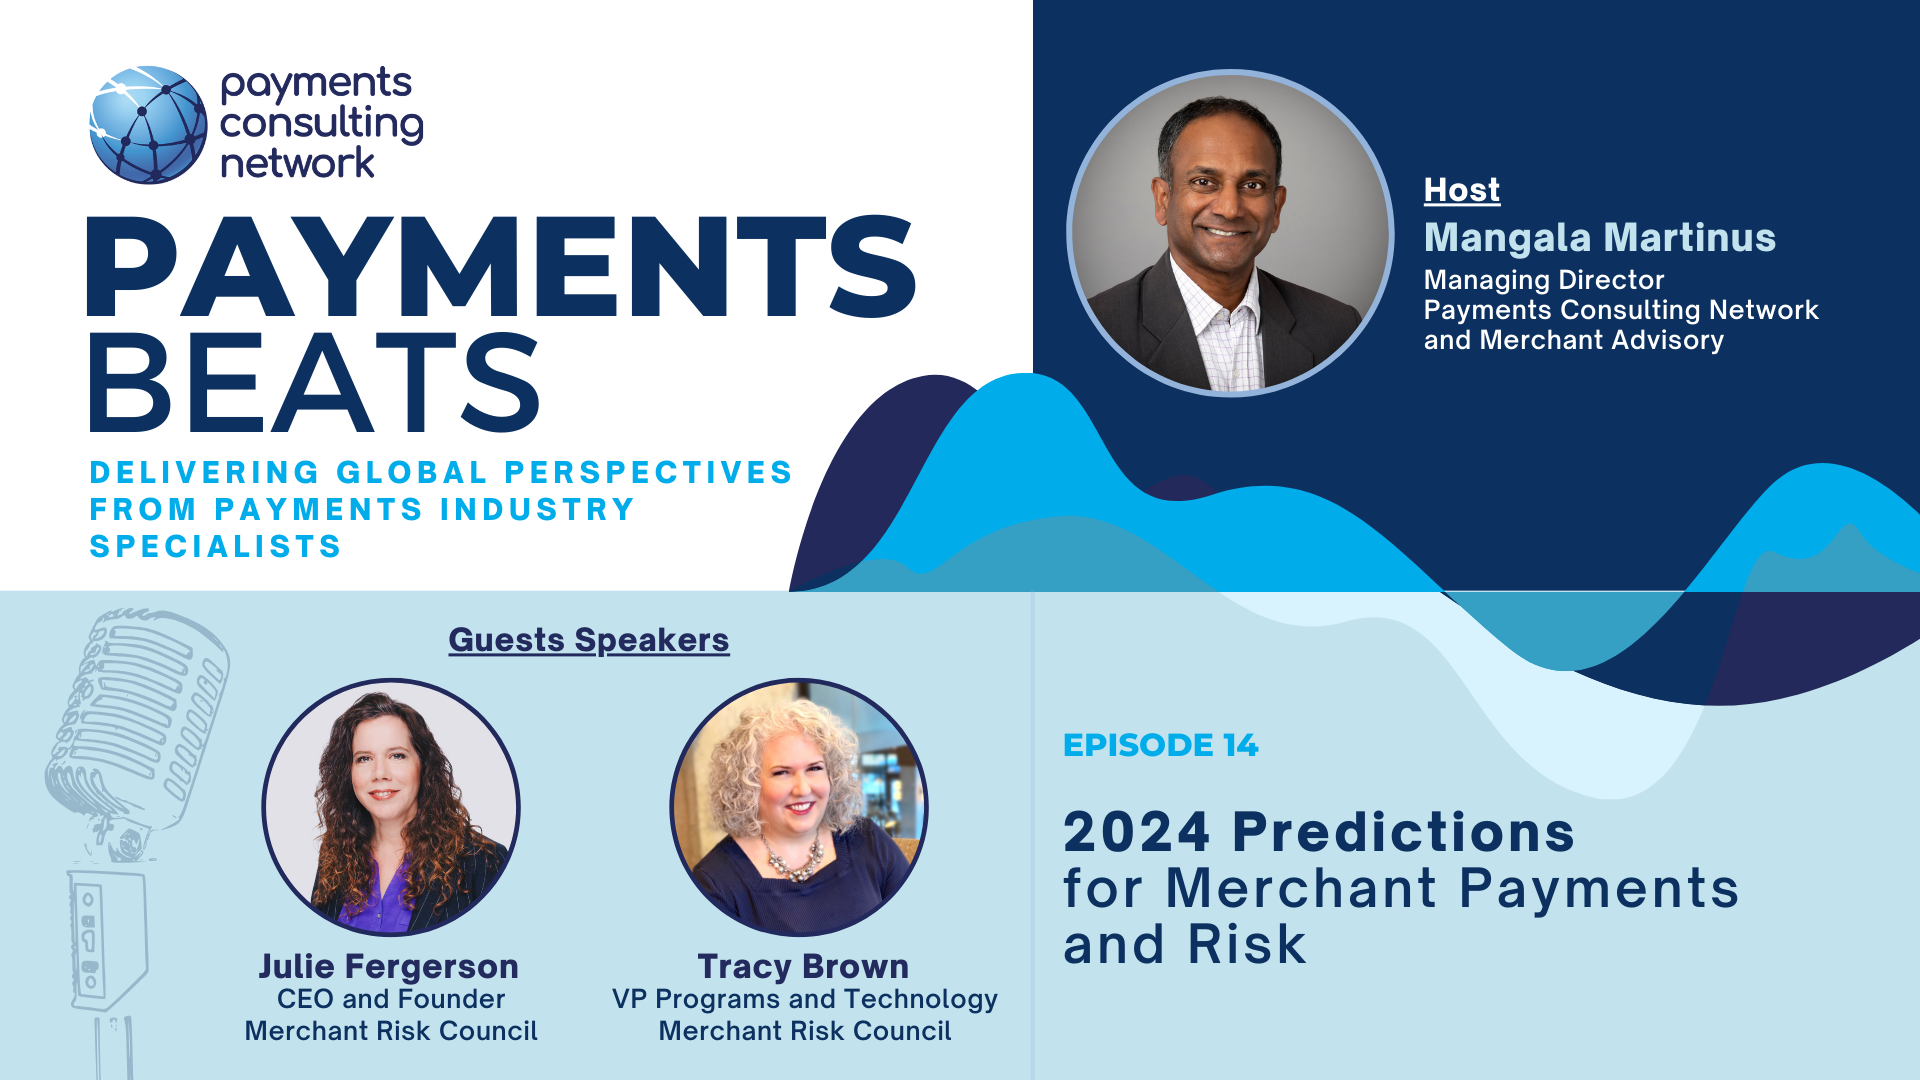 Episode 14 - 2024 Predictions for Merchant Payments and Risk